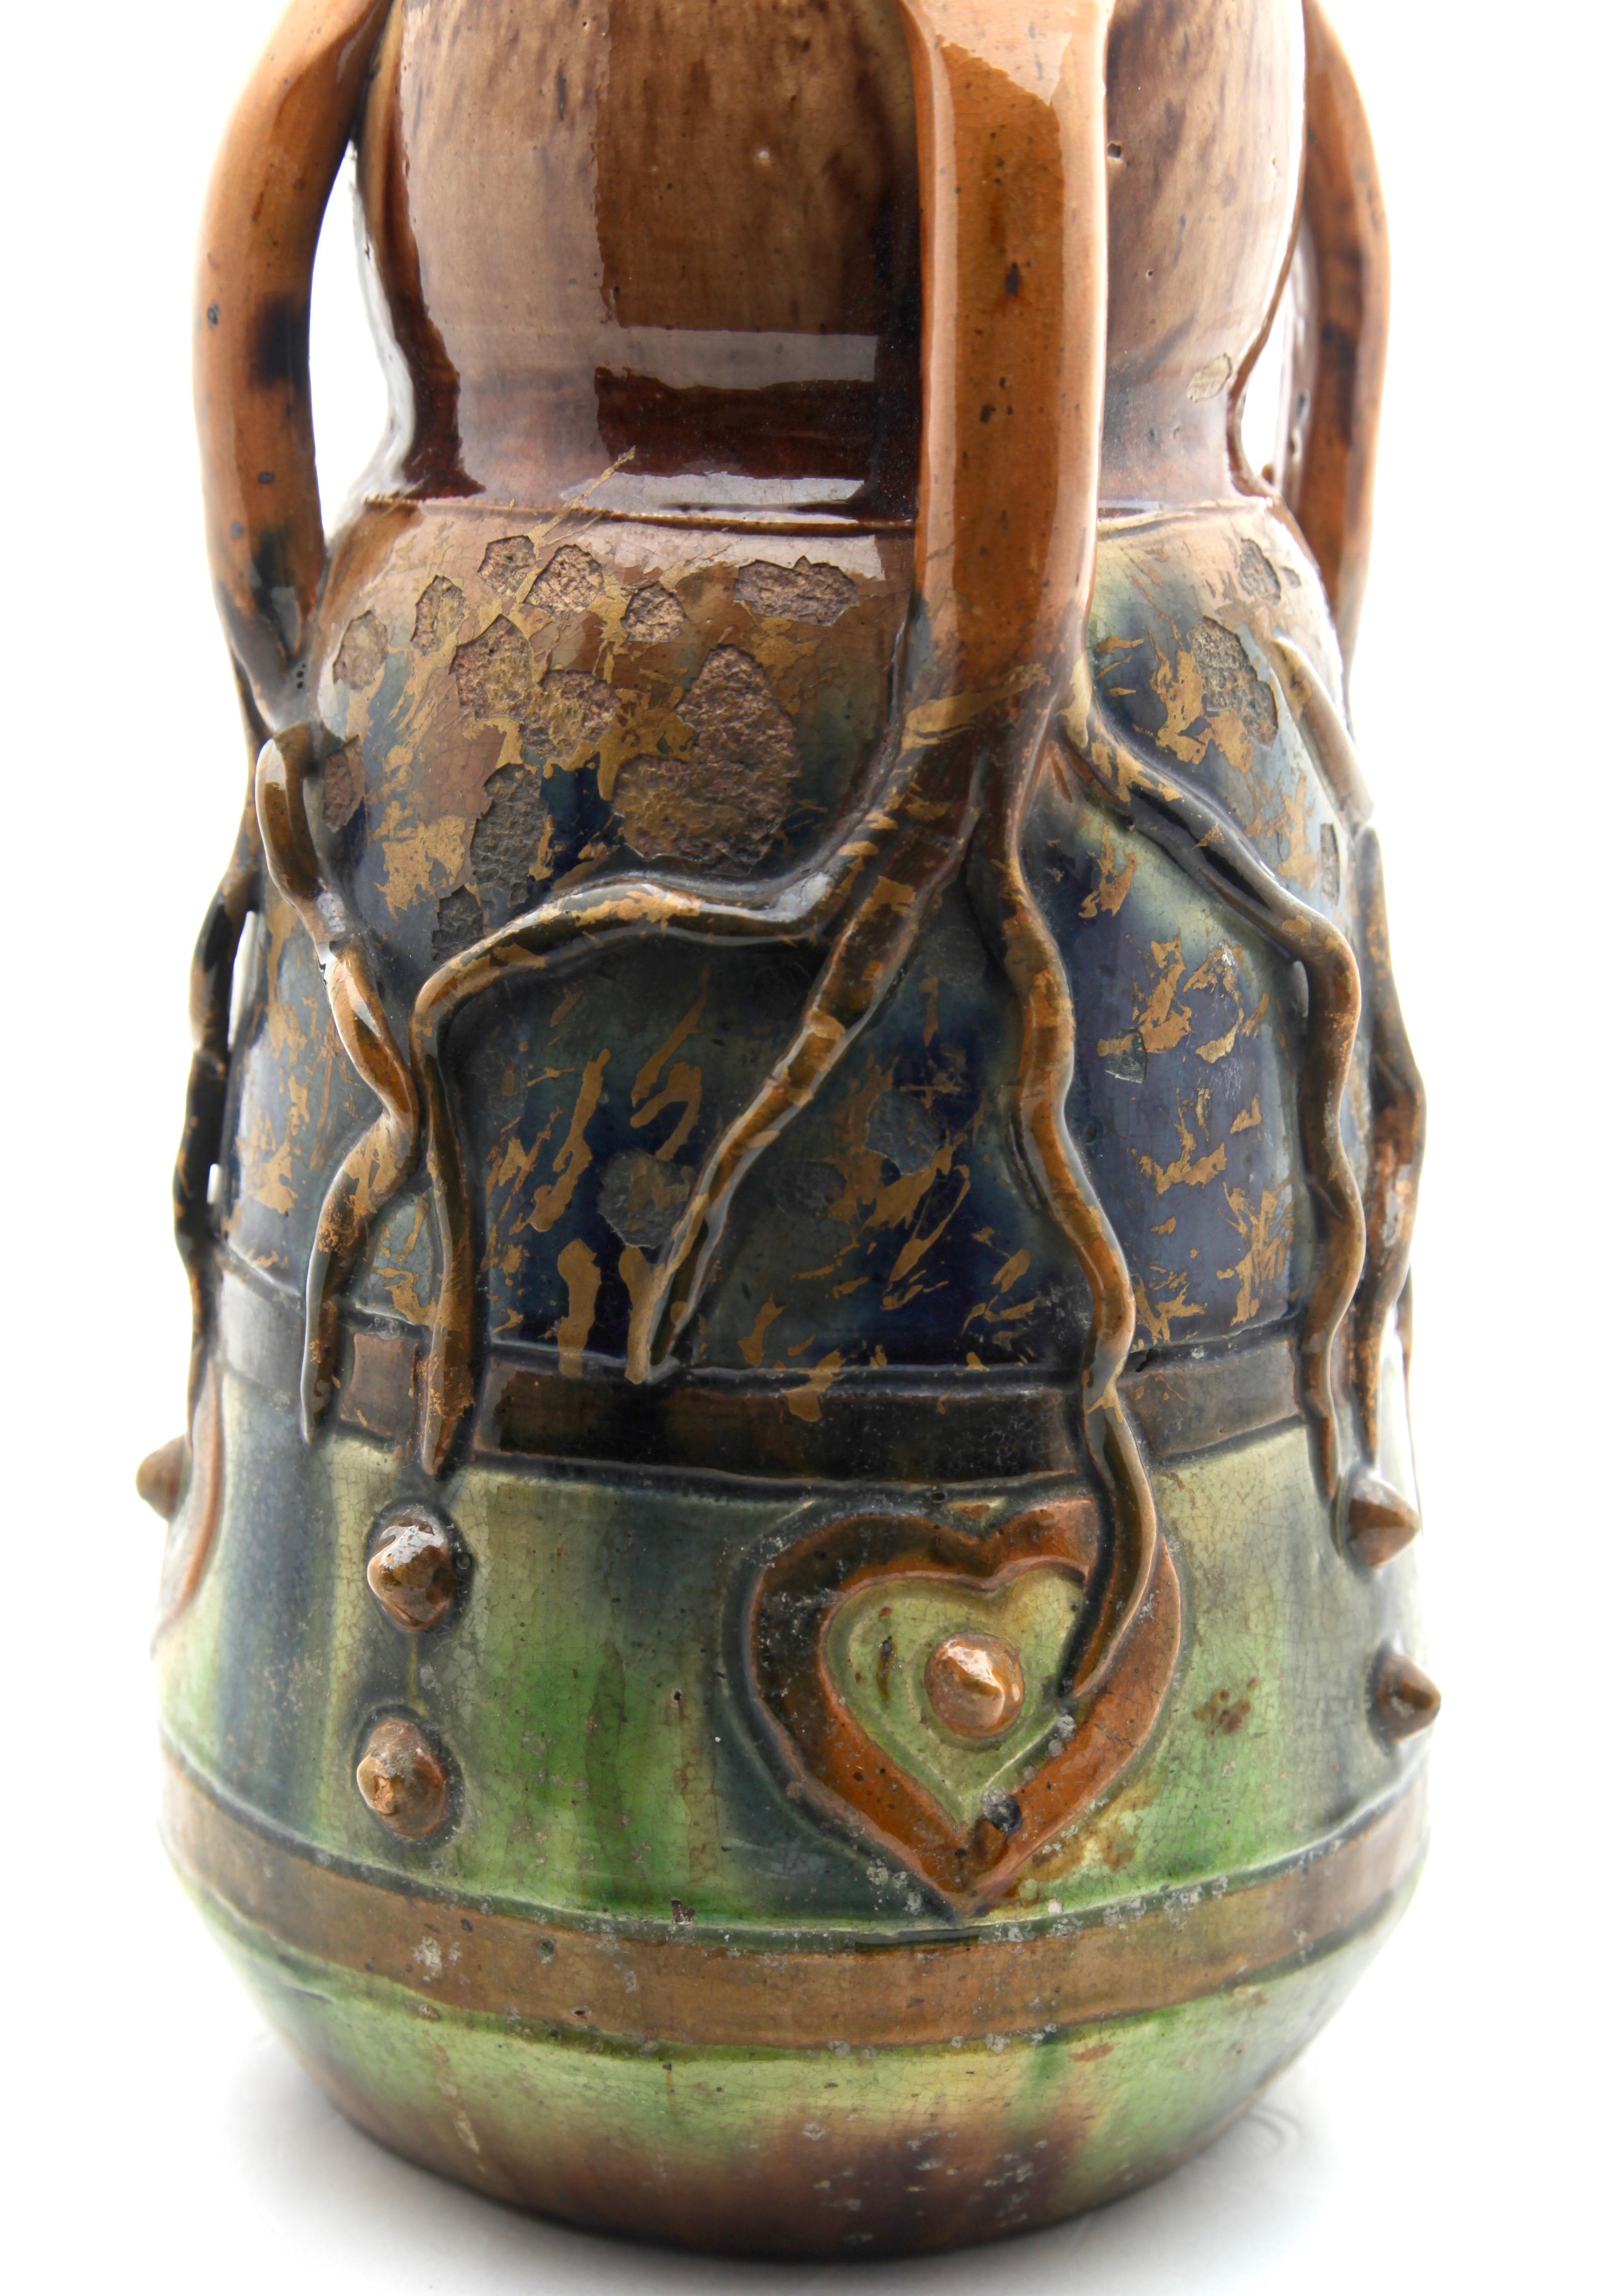 Belgian Torhout Ceramic Vase Beautiful Glaze in Shades of Brown and Green, circa 1910